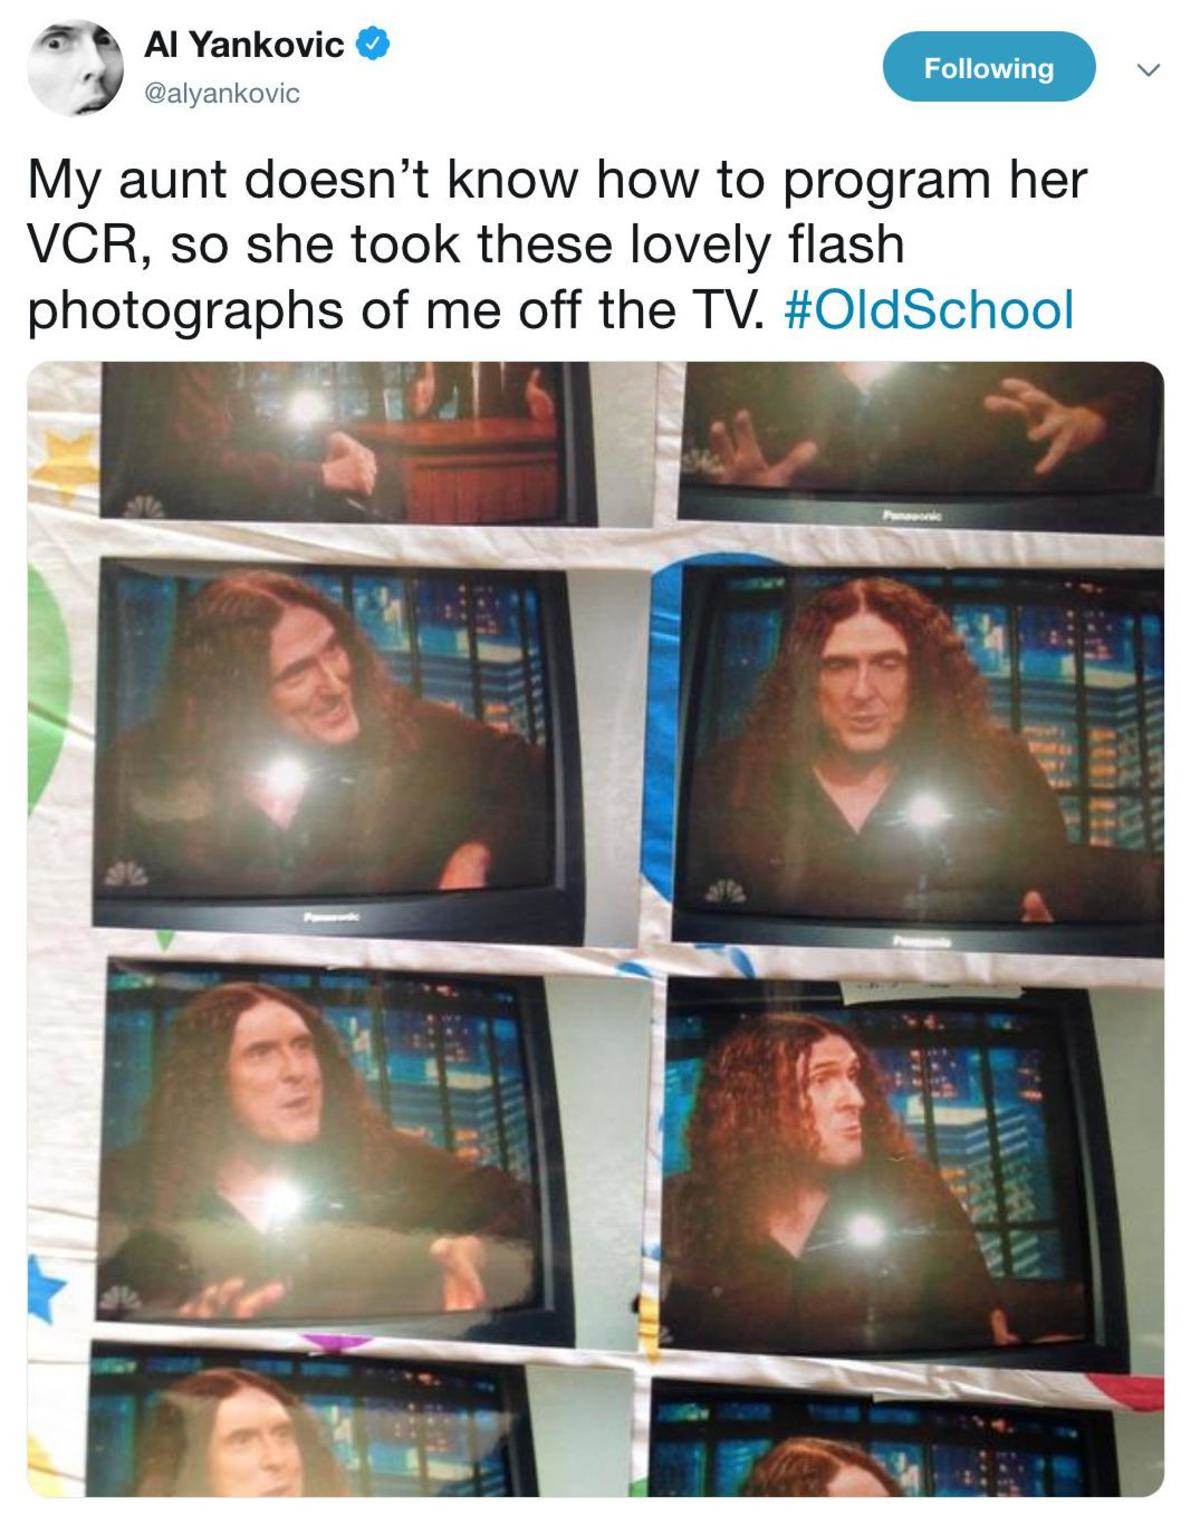 weird al wholesome - Al Yankovic ing My aunt doesn't know how to program her Vcr, so she took these lovely flash photographs of me off the Tv. AV111